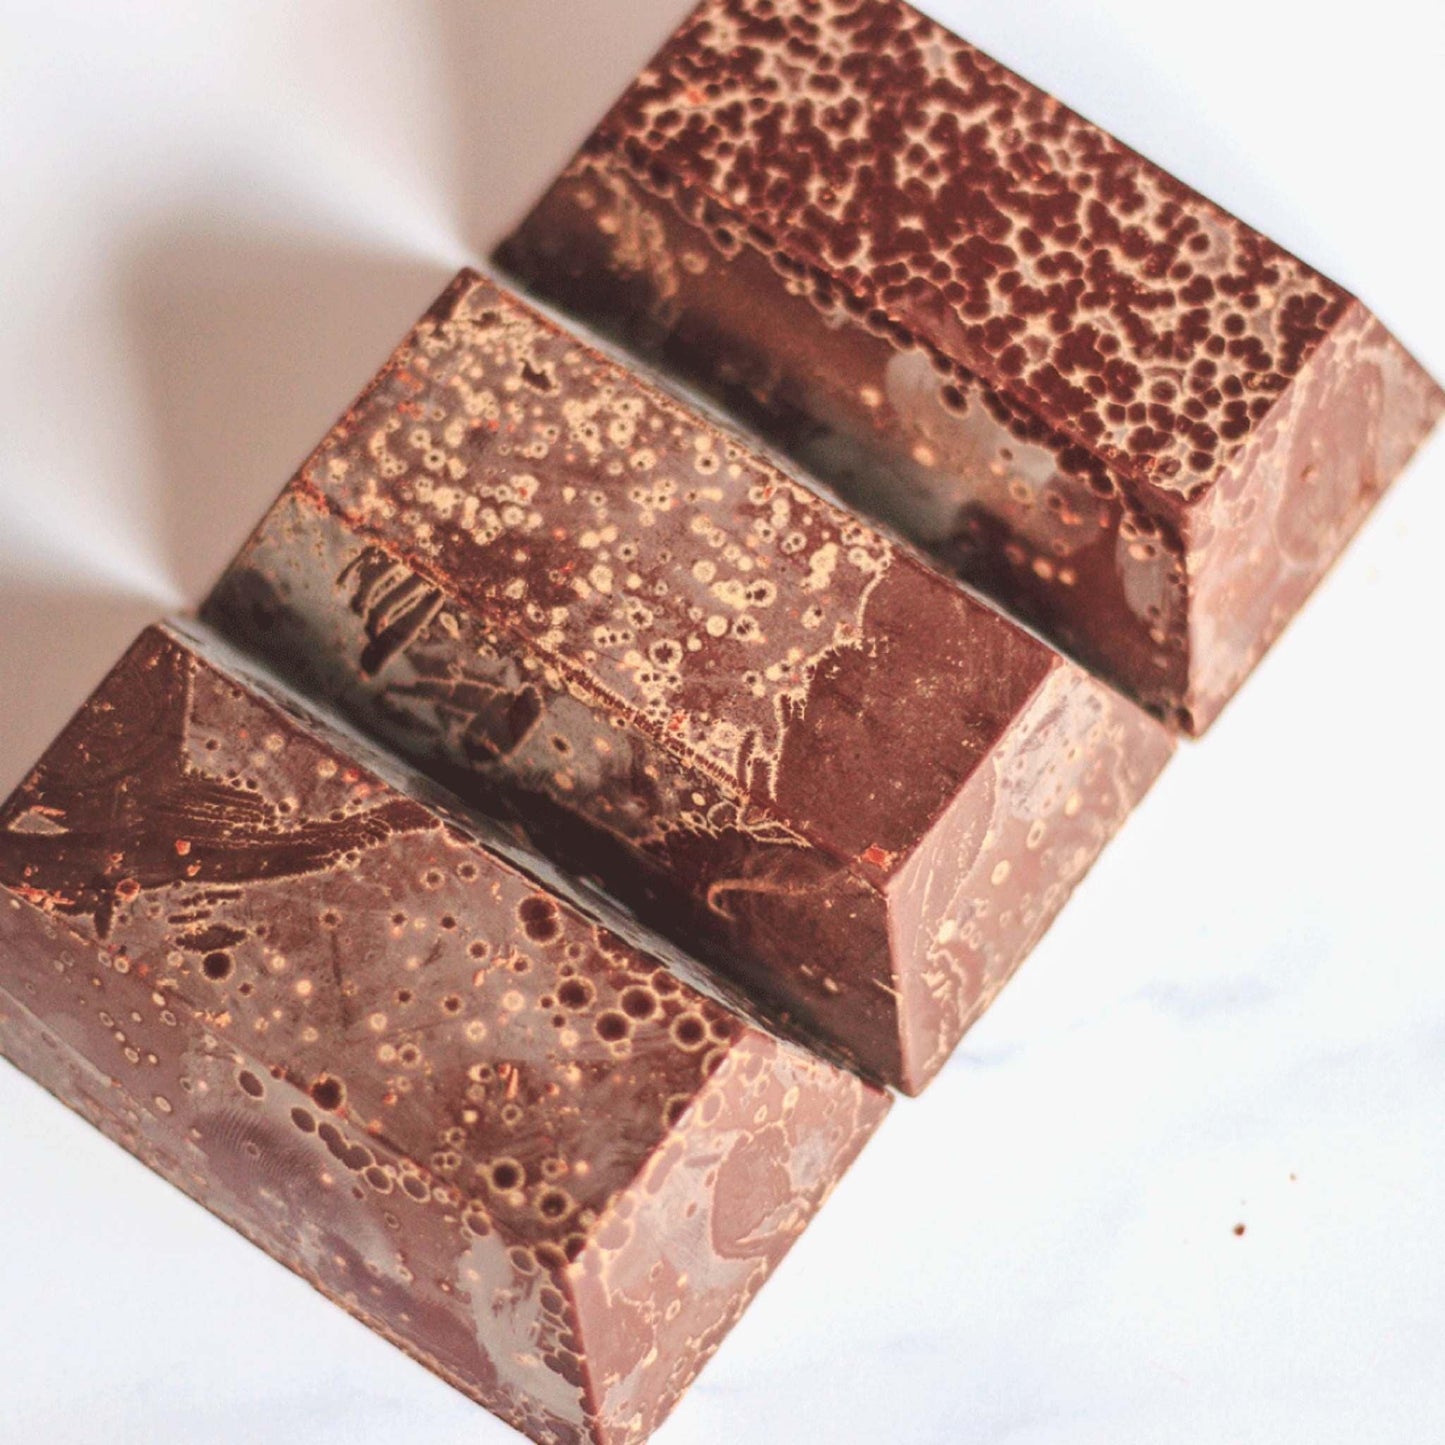 Nibbed Candy & Chocolate Nibbed Organic 100% Cacao Block 200g